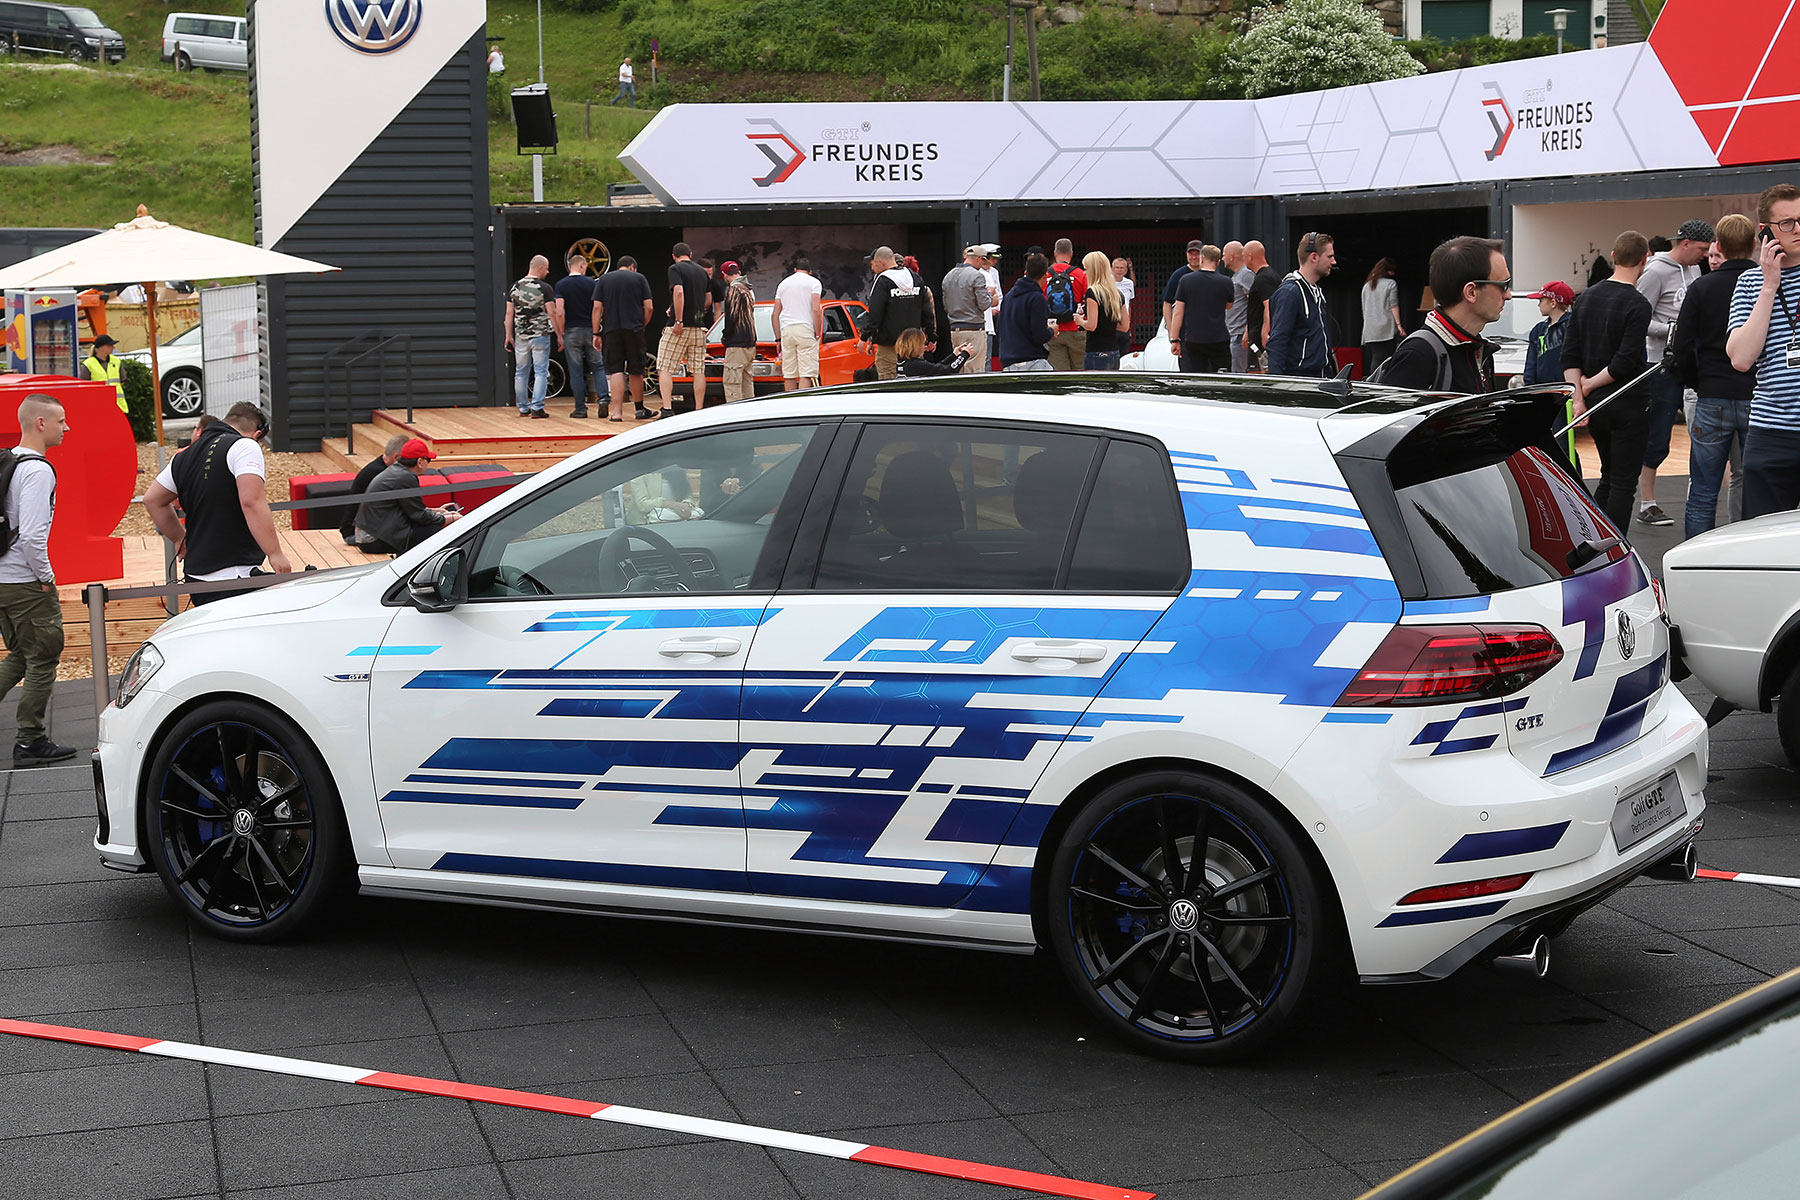 The new Golf GTI Clubsport – World premiere of the 300 PS flagship GTI  model